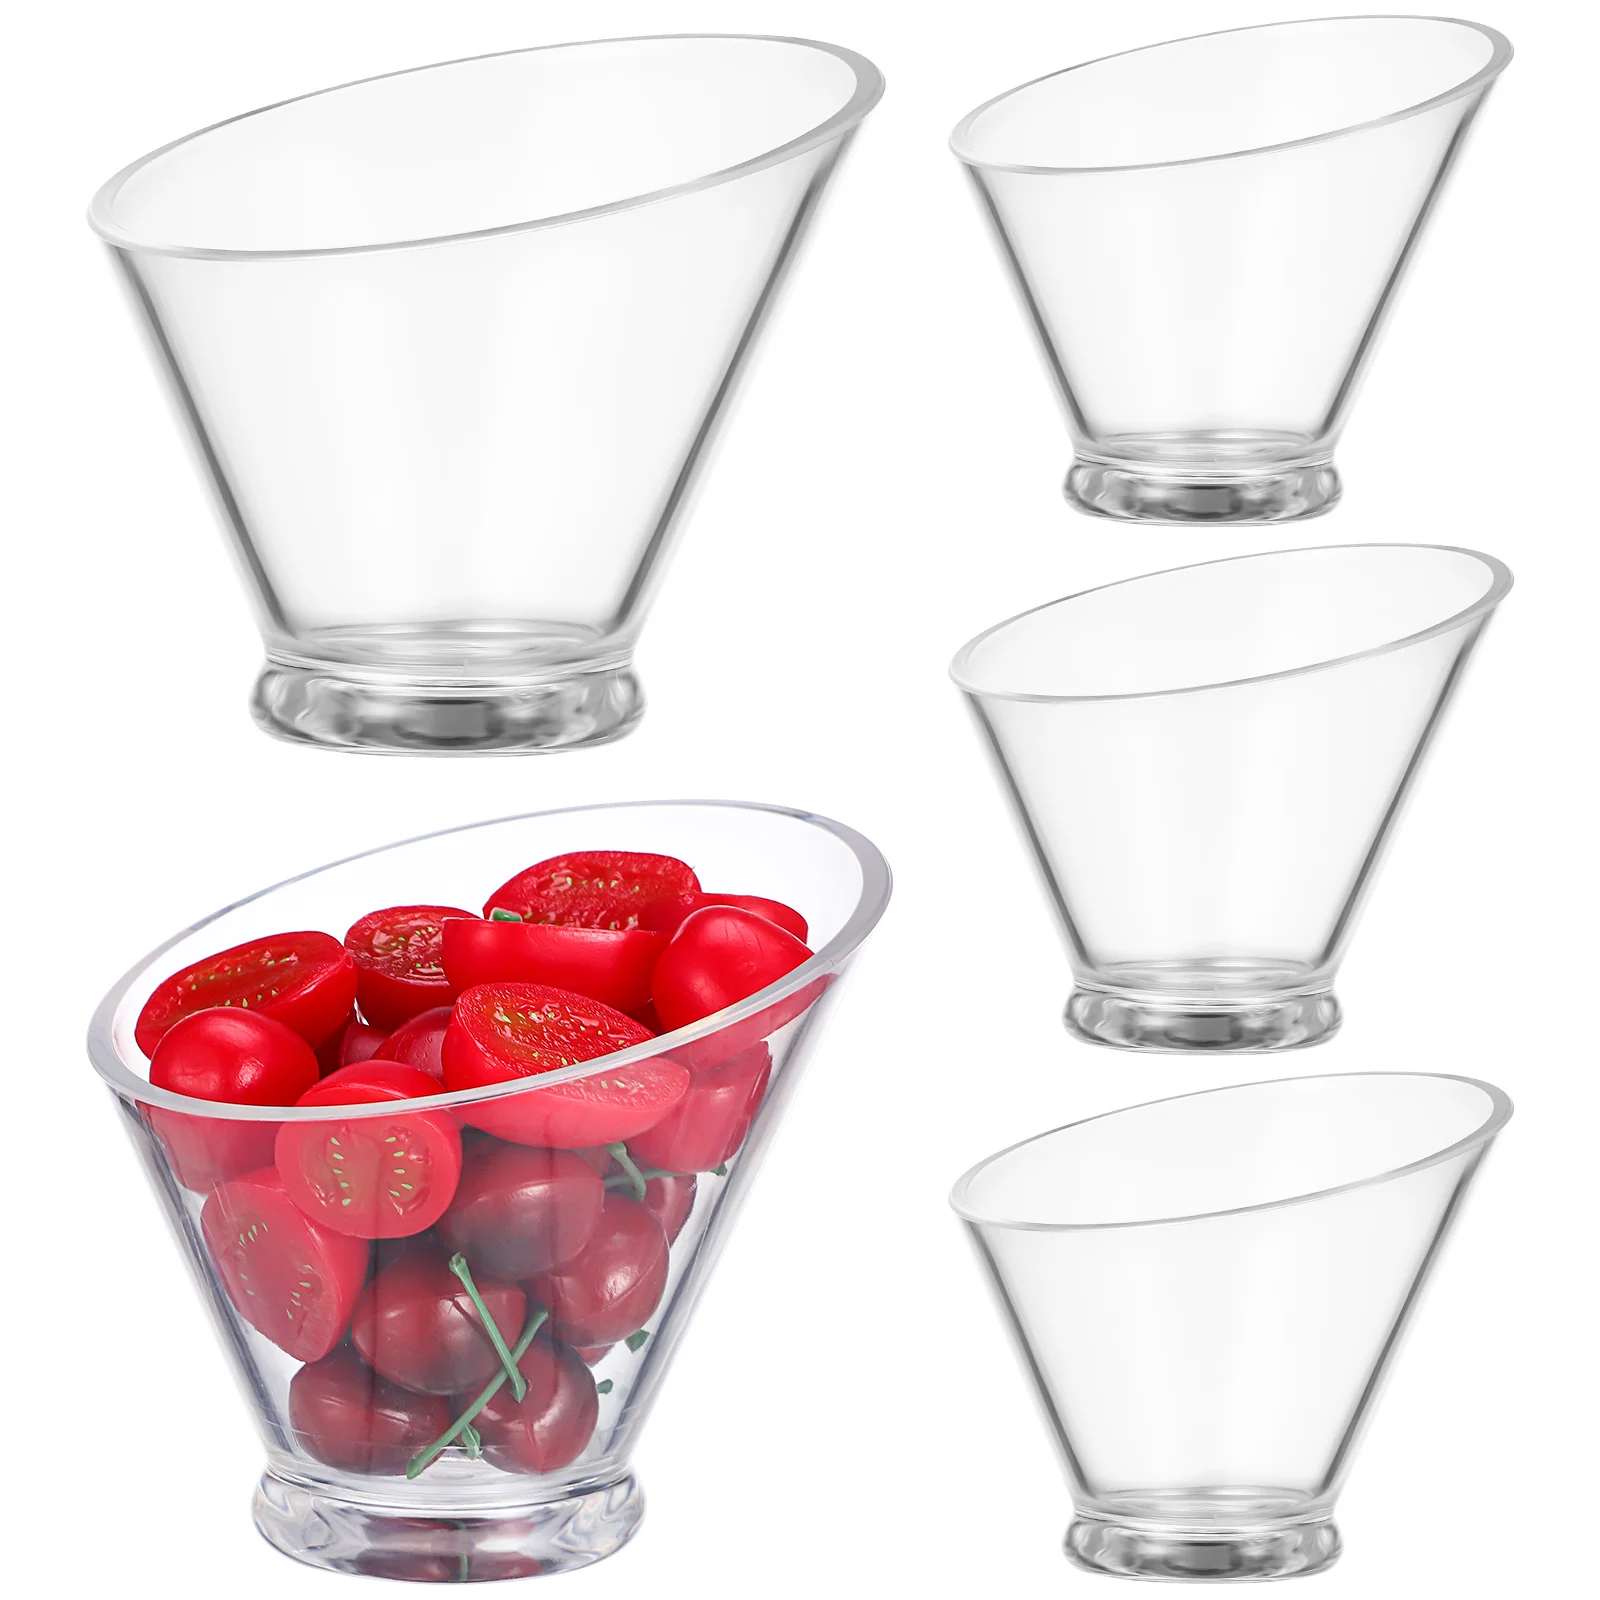 

5pcs Salad Bowls Ice Cream Dessert Containers Clear Candy Bowls Serving Bowls for Party